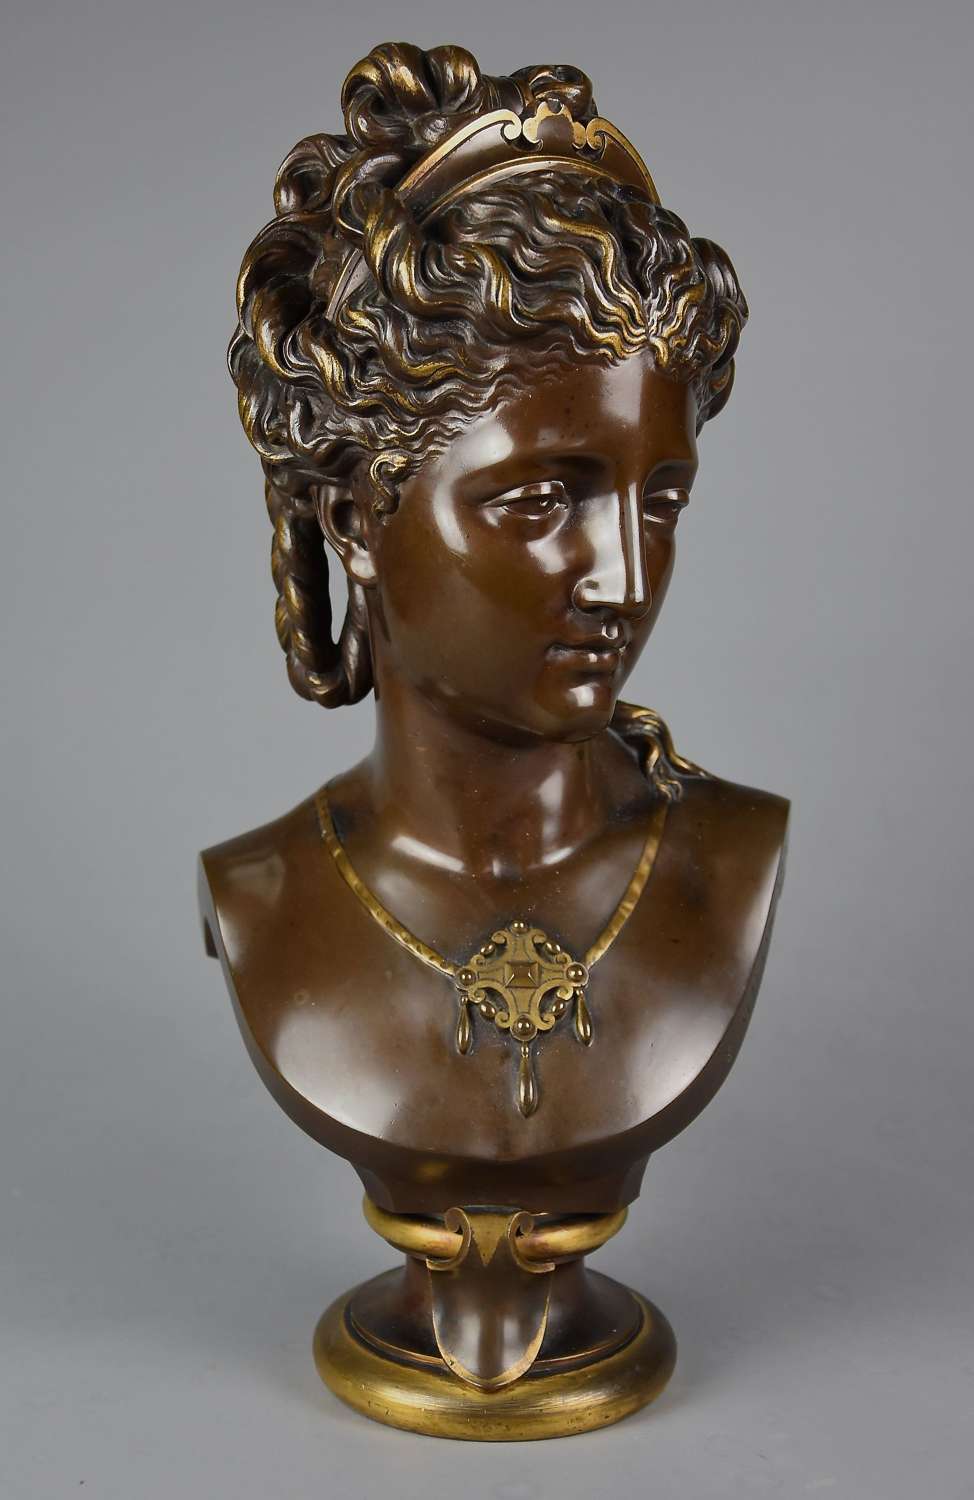 19thc fine quality French bronze bust of a female, possibly of Diana